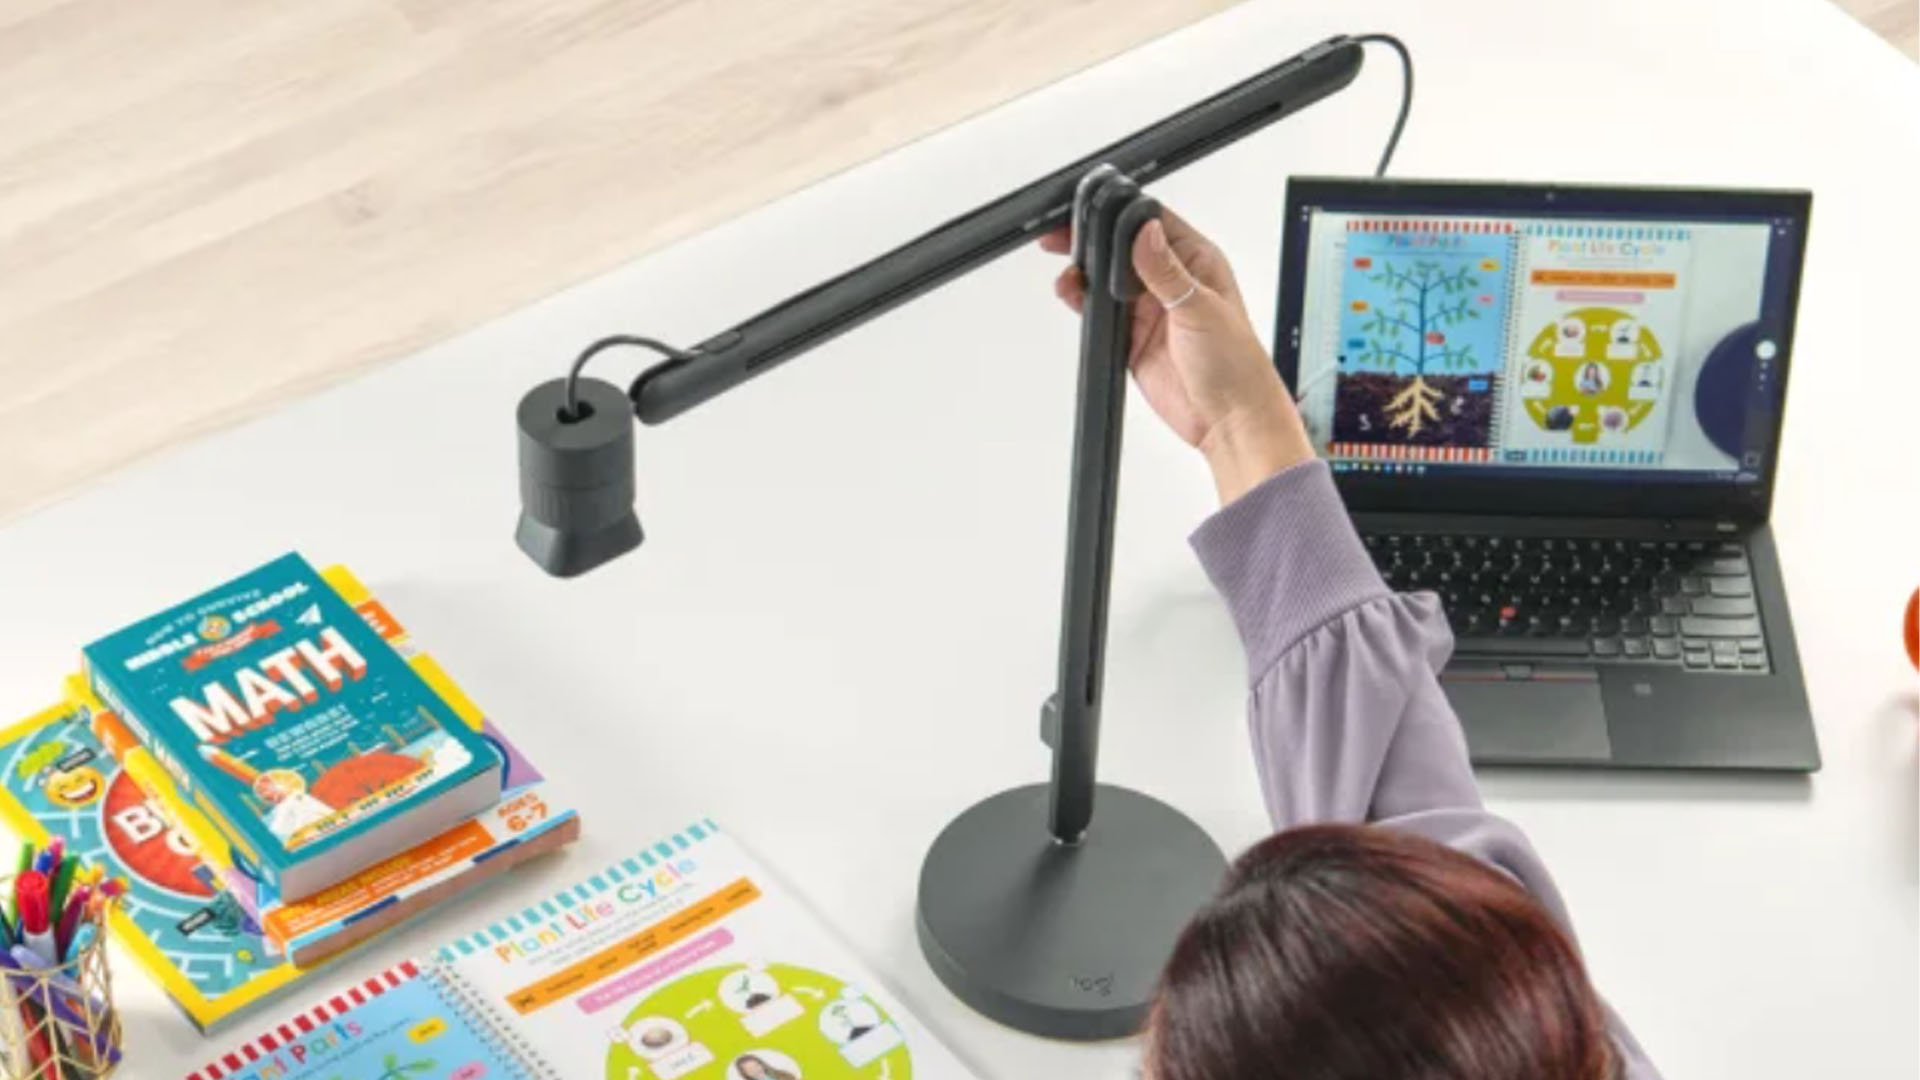 This new Logitech webcam on a stick is a streamers dream